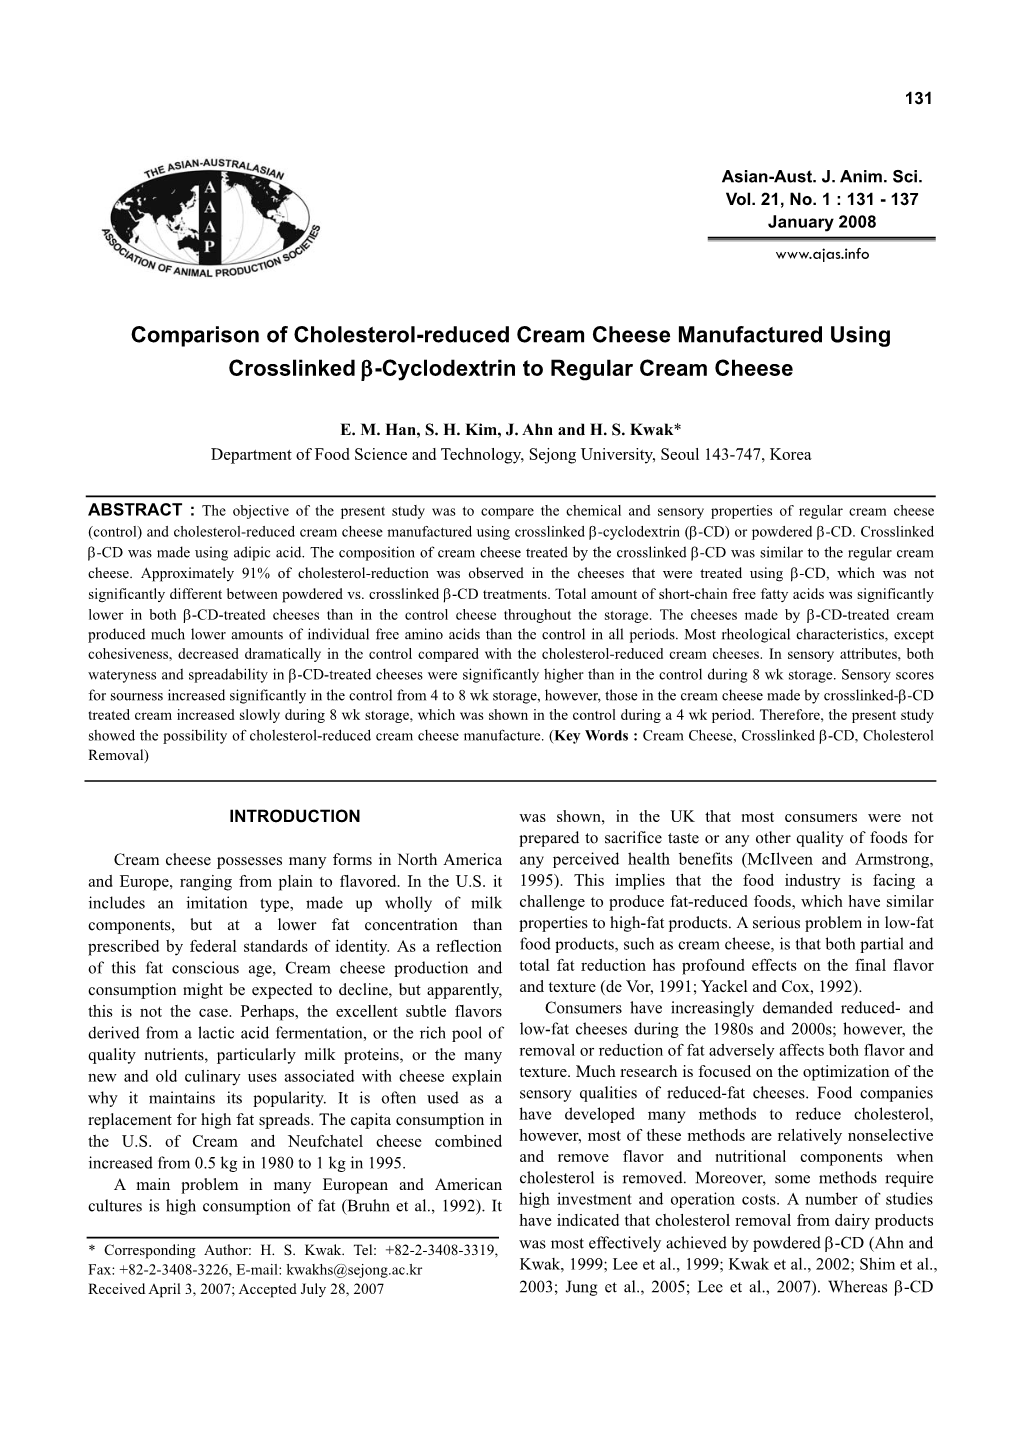 Comparison of Cholesterol-Reduced Cream Cheese Manufactured Using Crosslinked Β-Cyclodextrin to Regular Cream Cheese